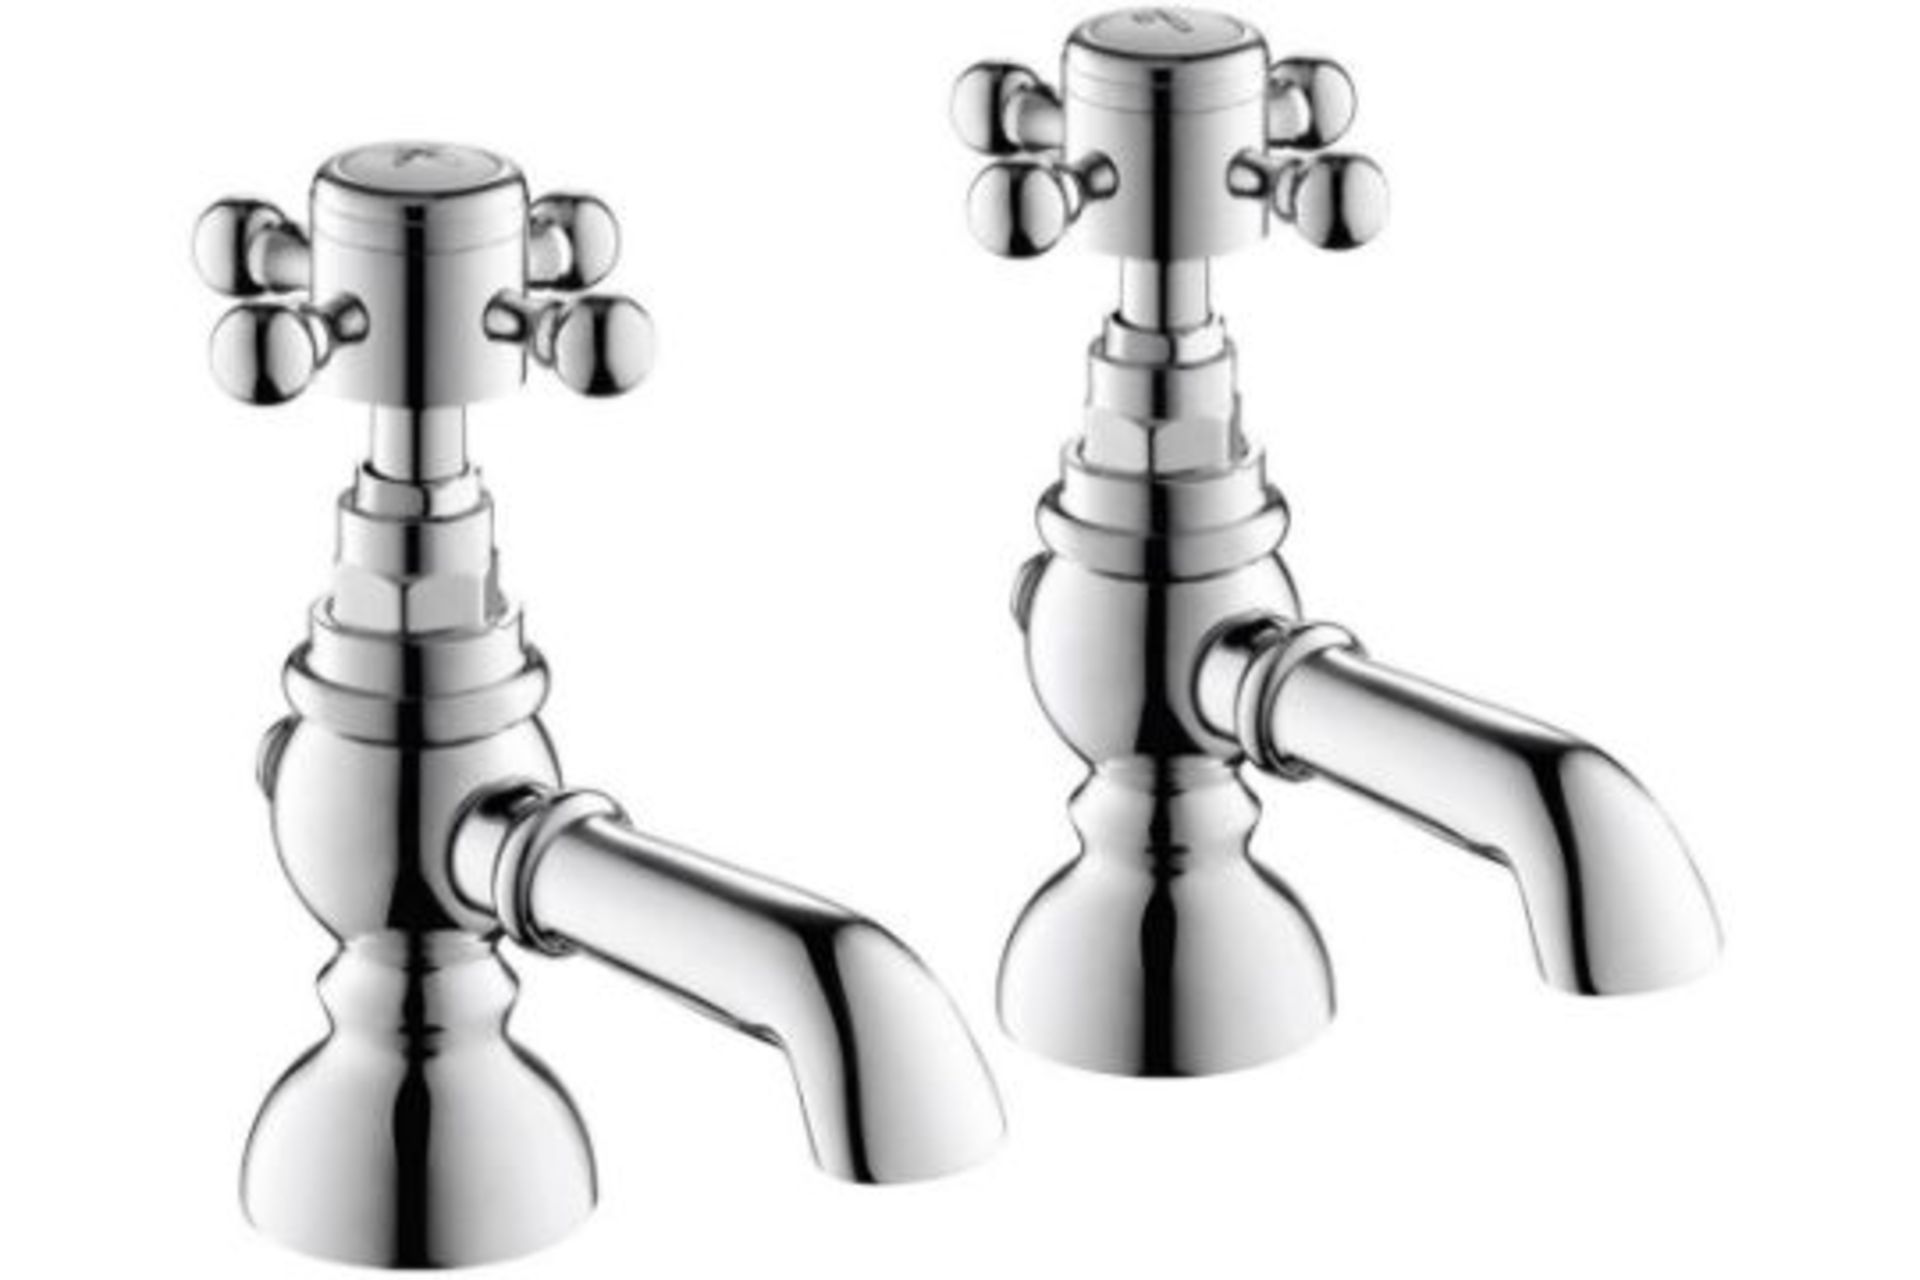 New & Boxed Traditional Pair Of Hot And Cold Basin Sink Taps Chrome Vintage Faucets. Tb31.Ideal - Image 2 of 2